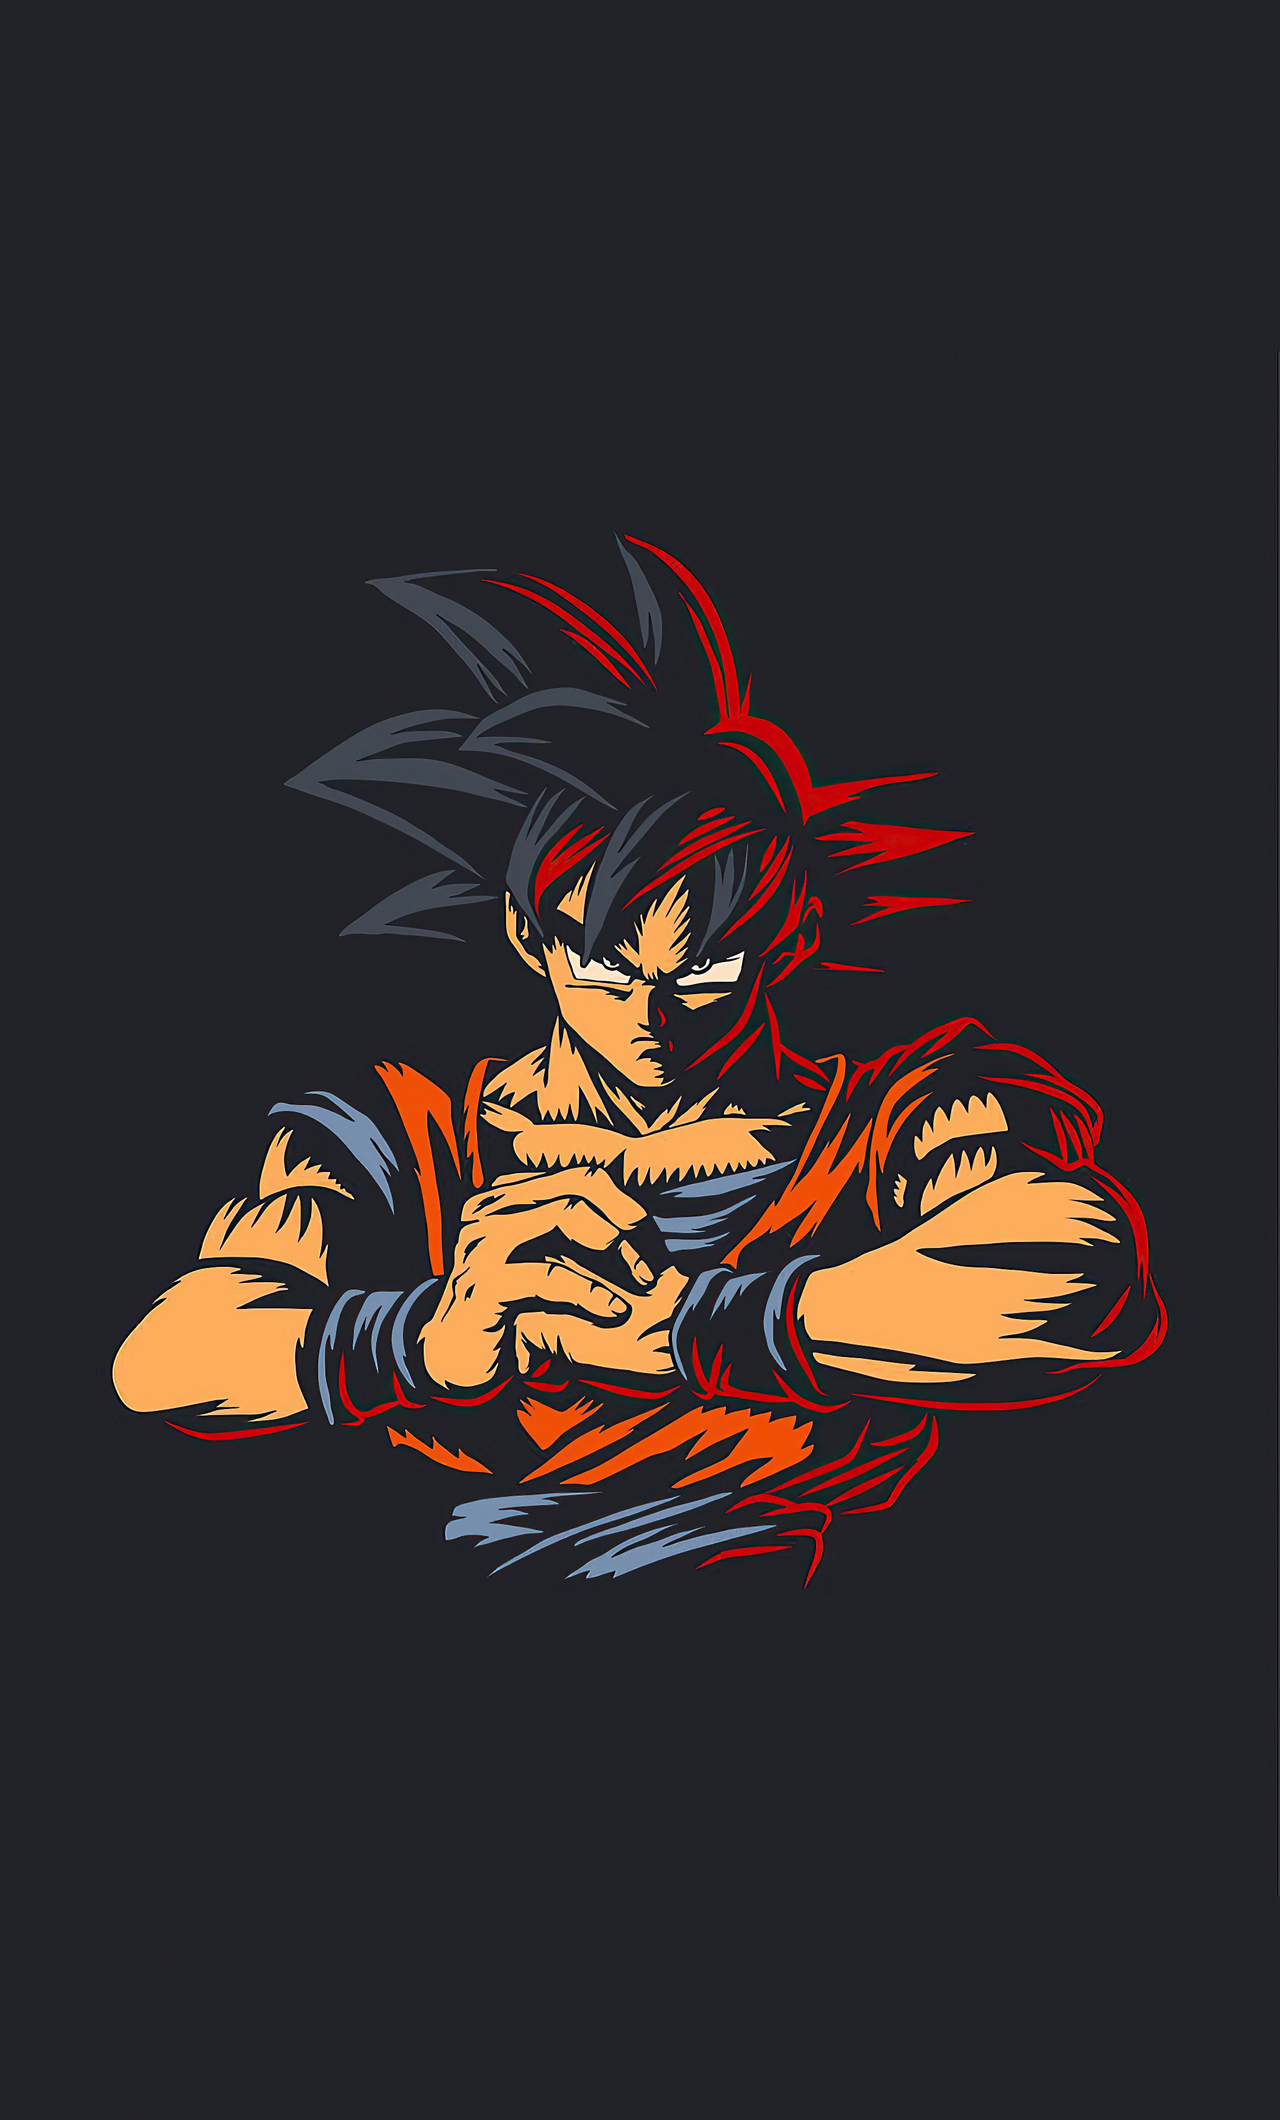 X goku iphone hd k wallpapers images backgrounds photos and pictures